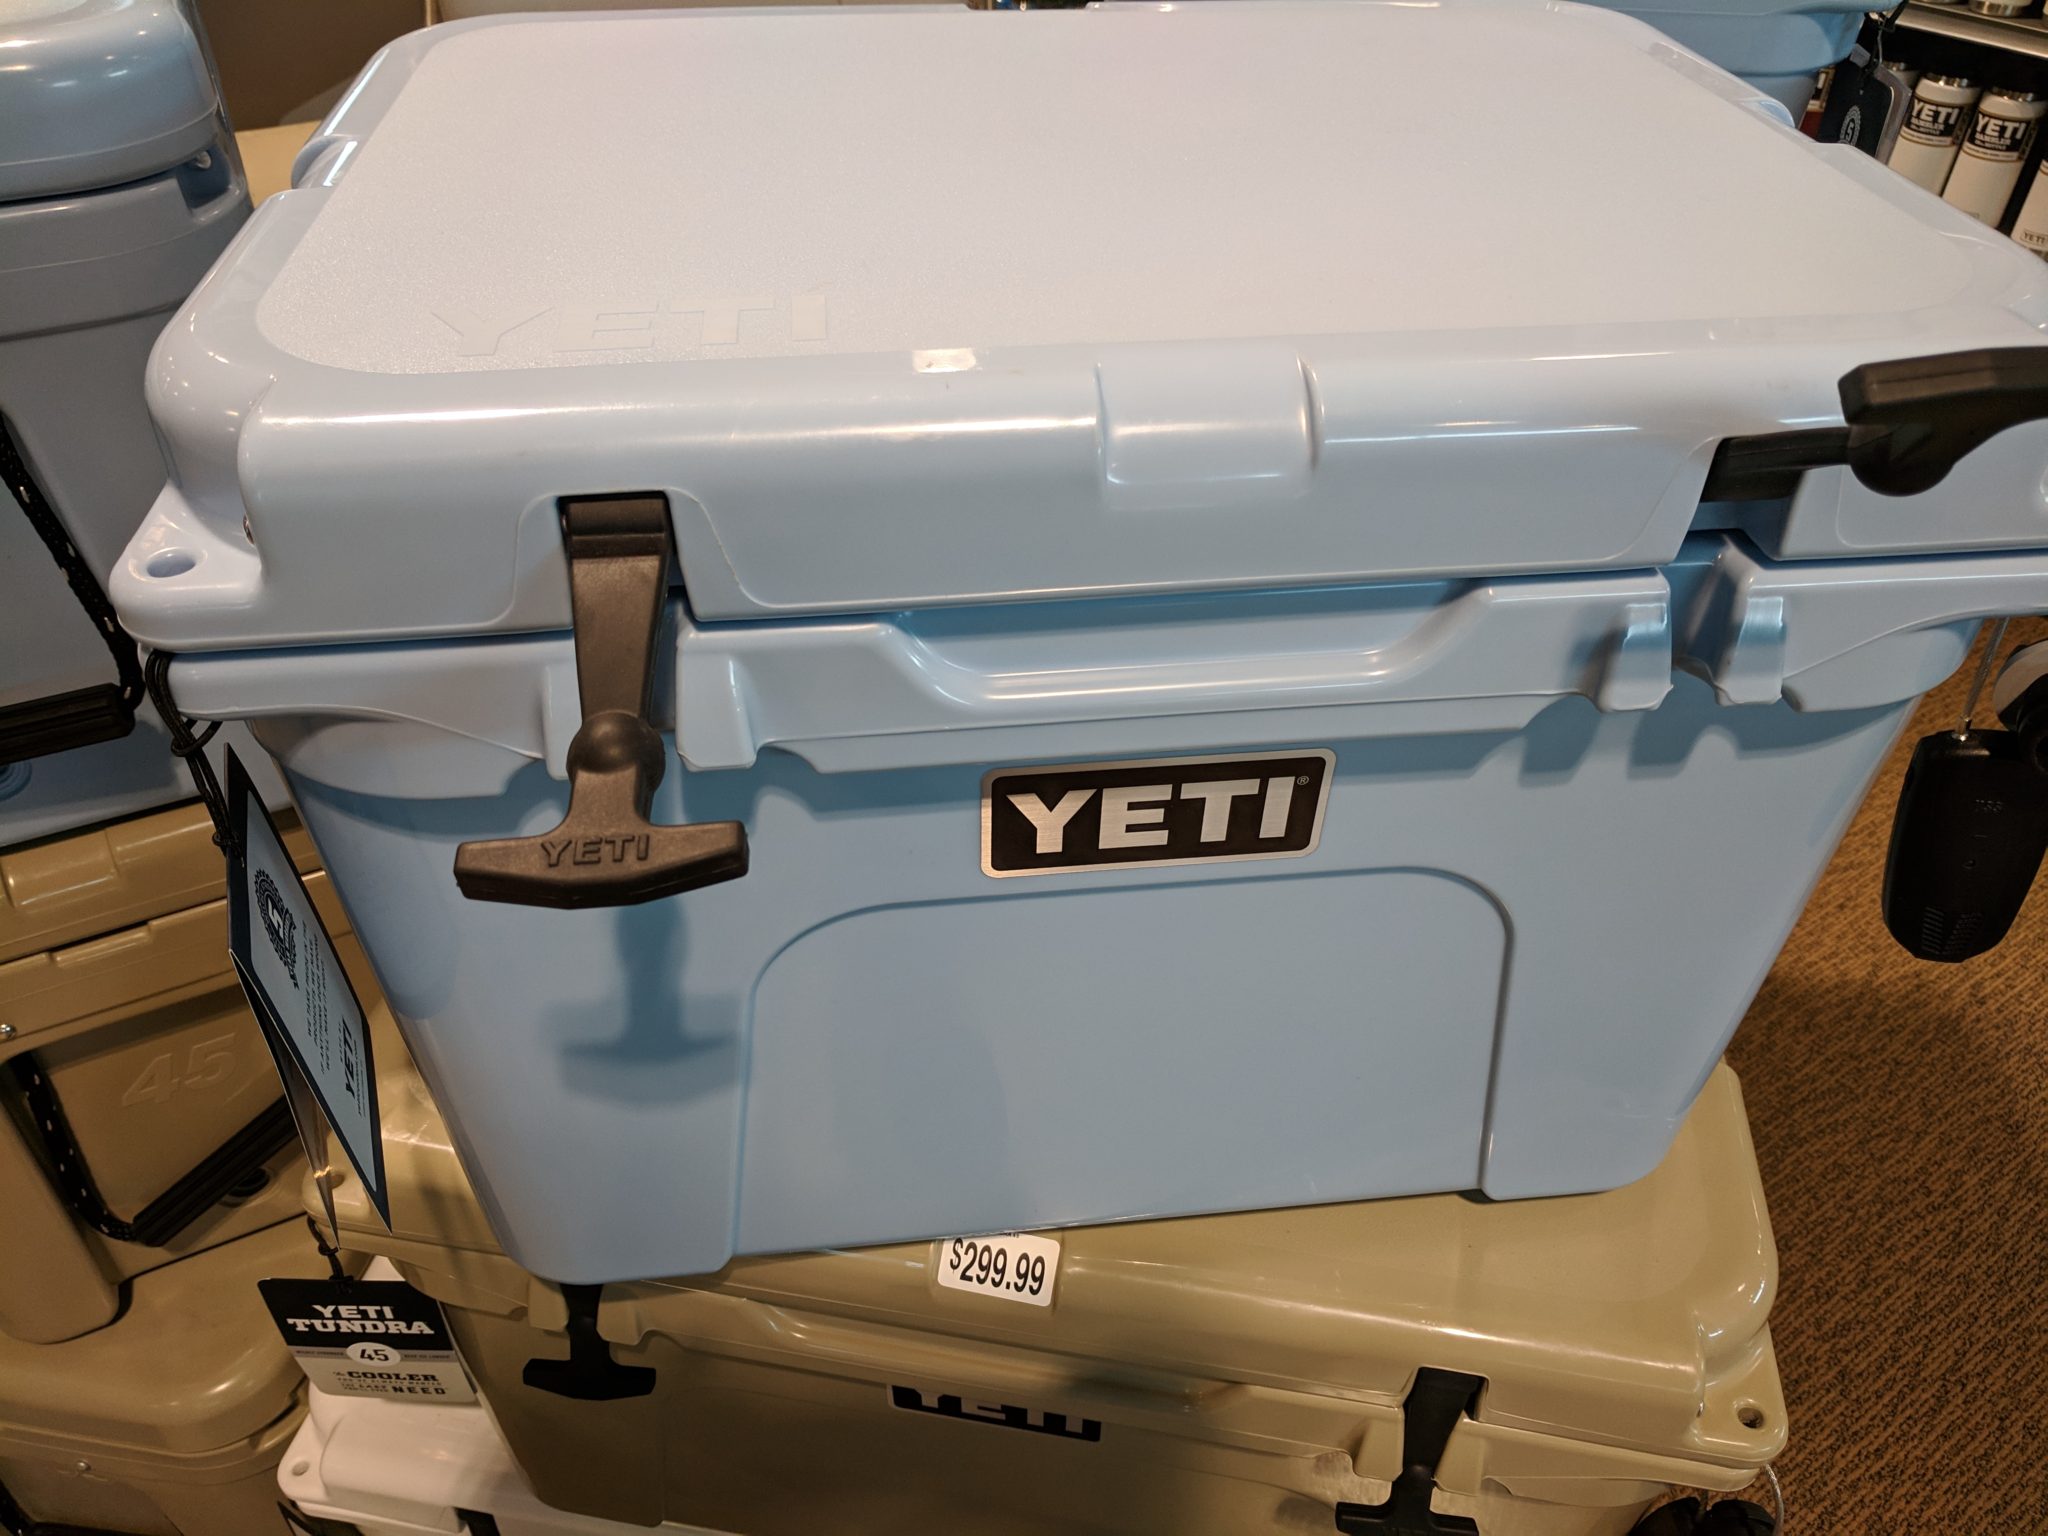 rtic personal cooler